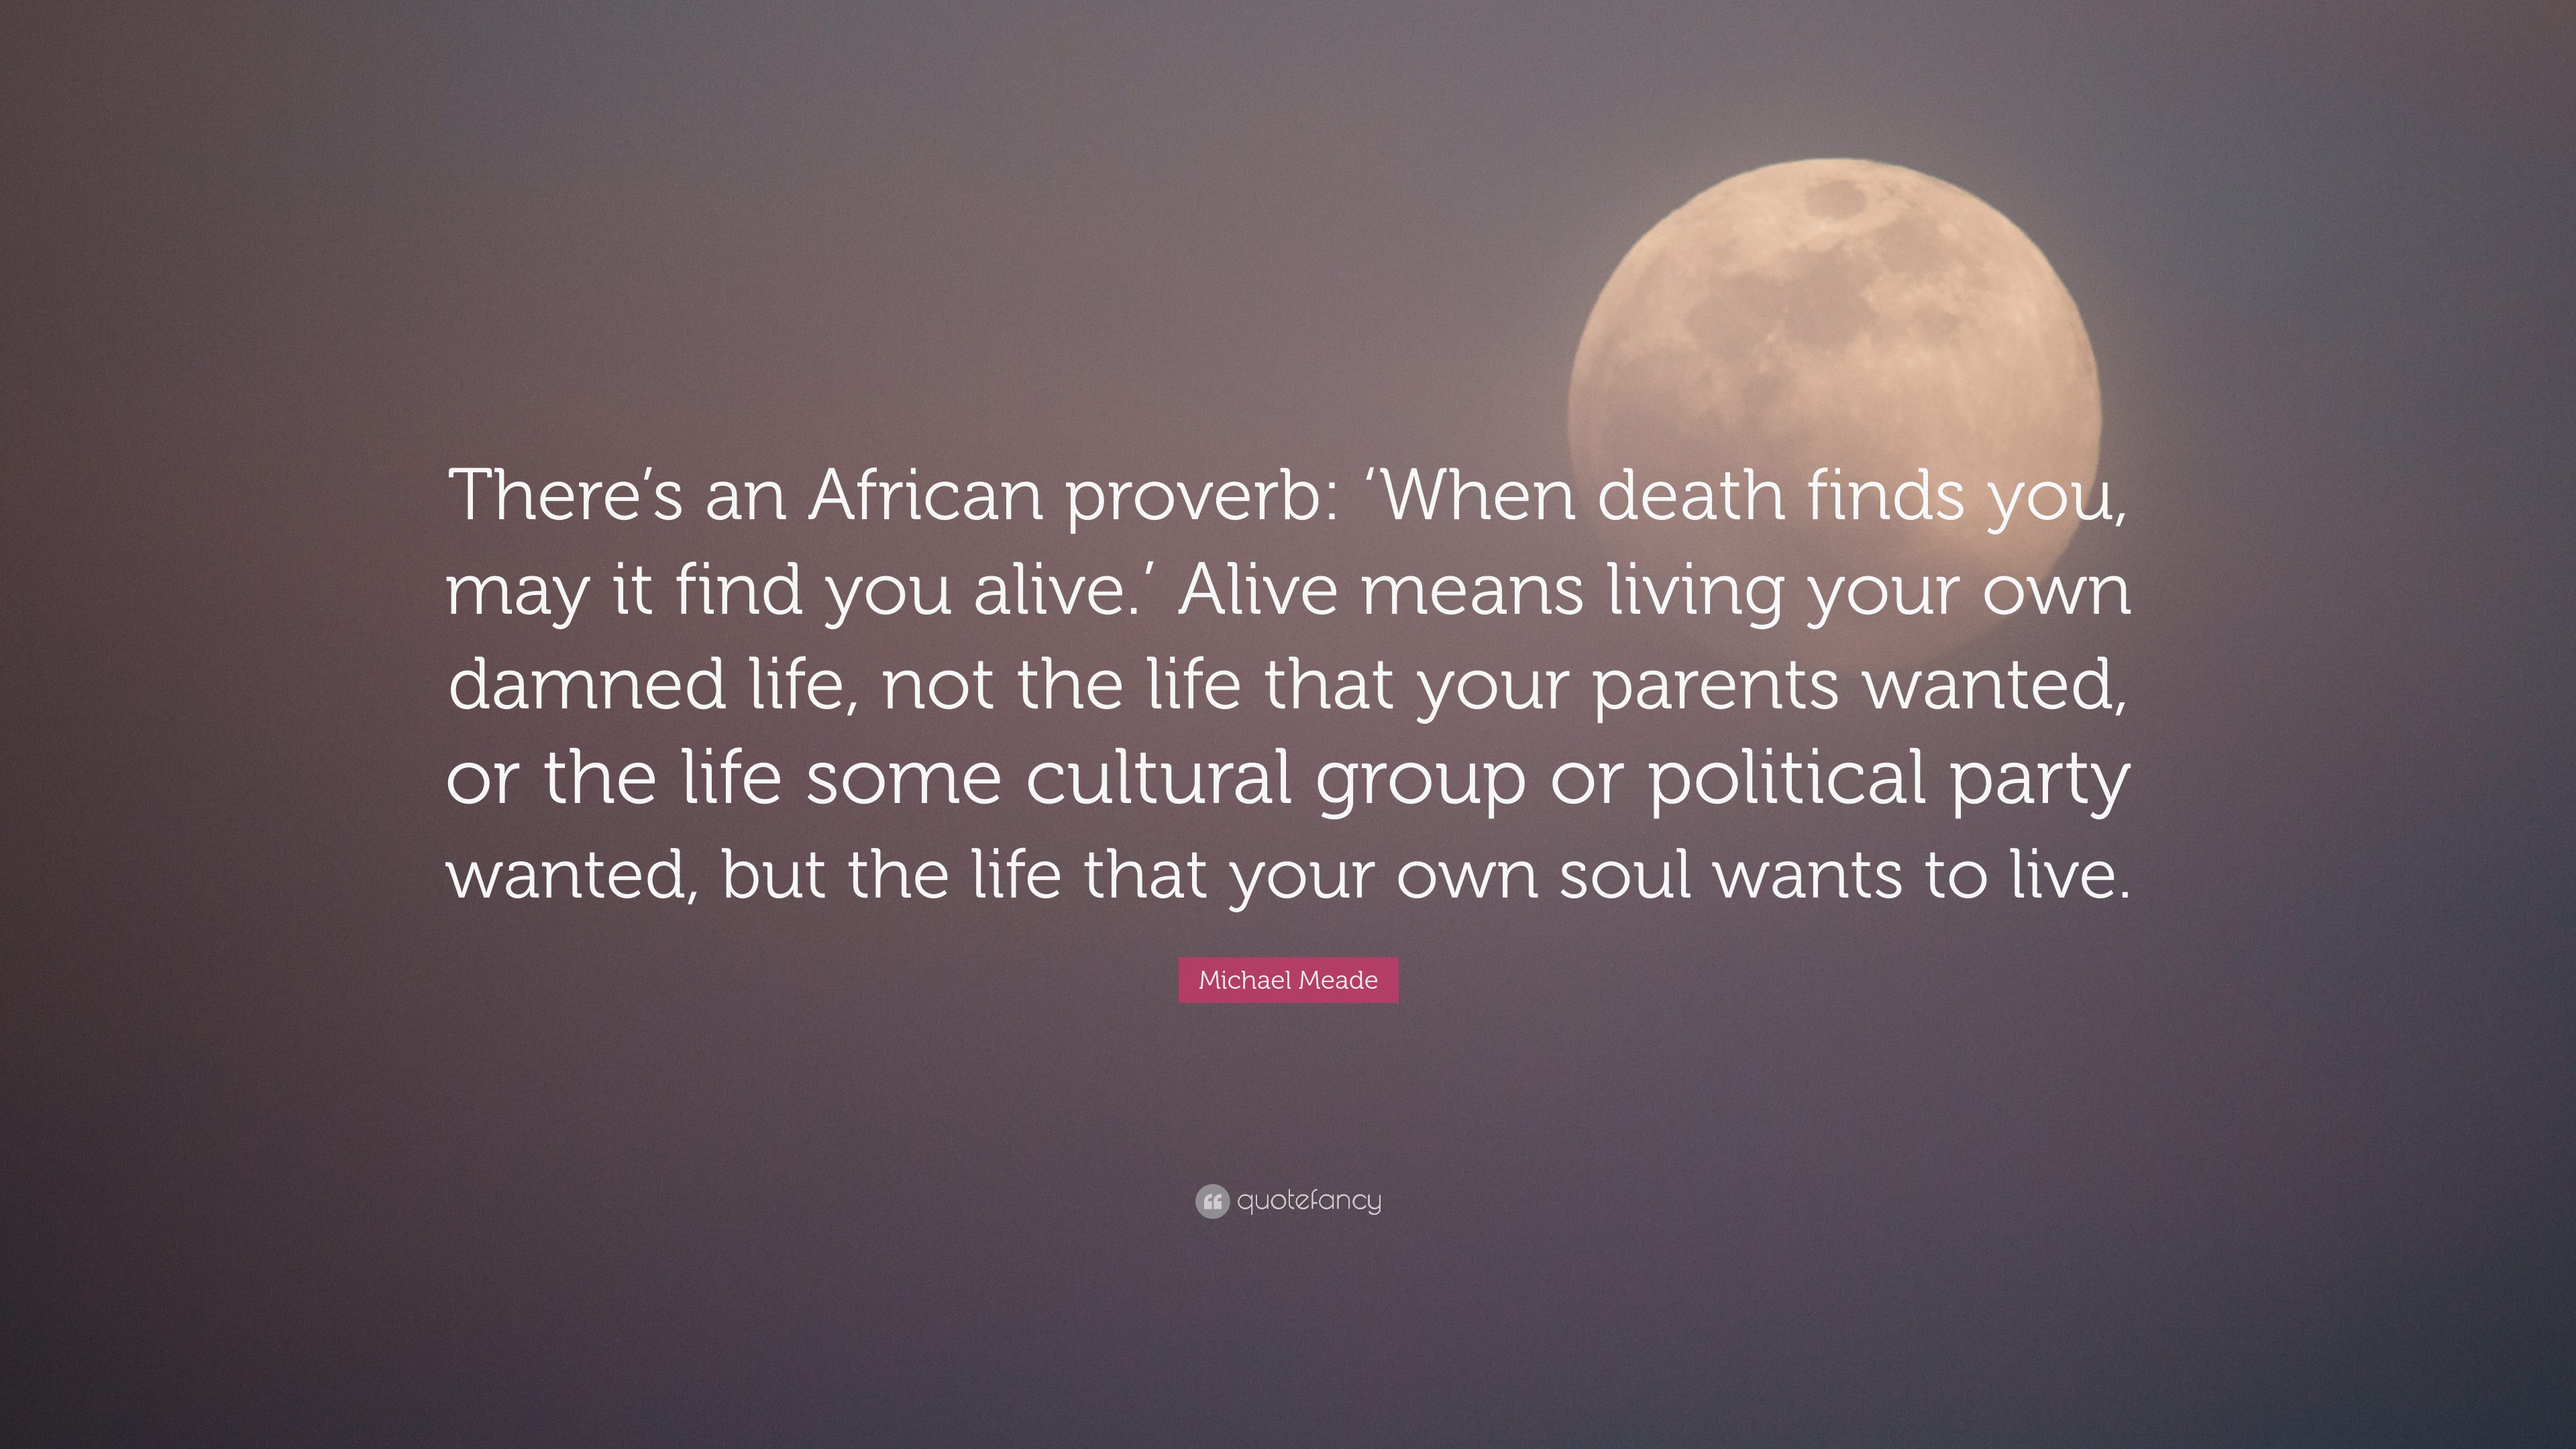 https://quotefancy.com/media/wallpaper/3840x2160/4876415-Michael-Meade-Quote-There-s-an-African-proverb-When-death-finds.jpg